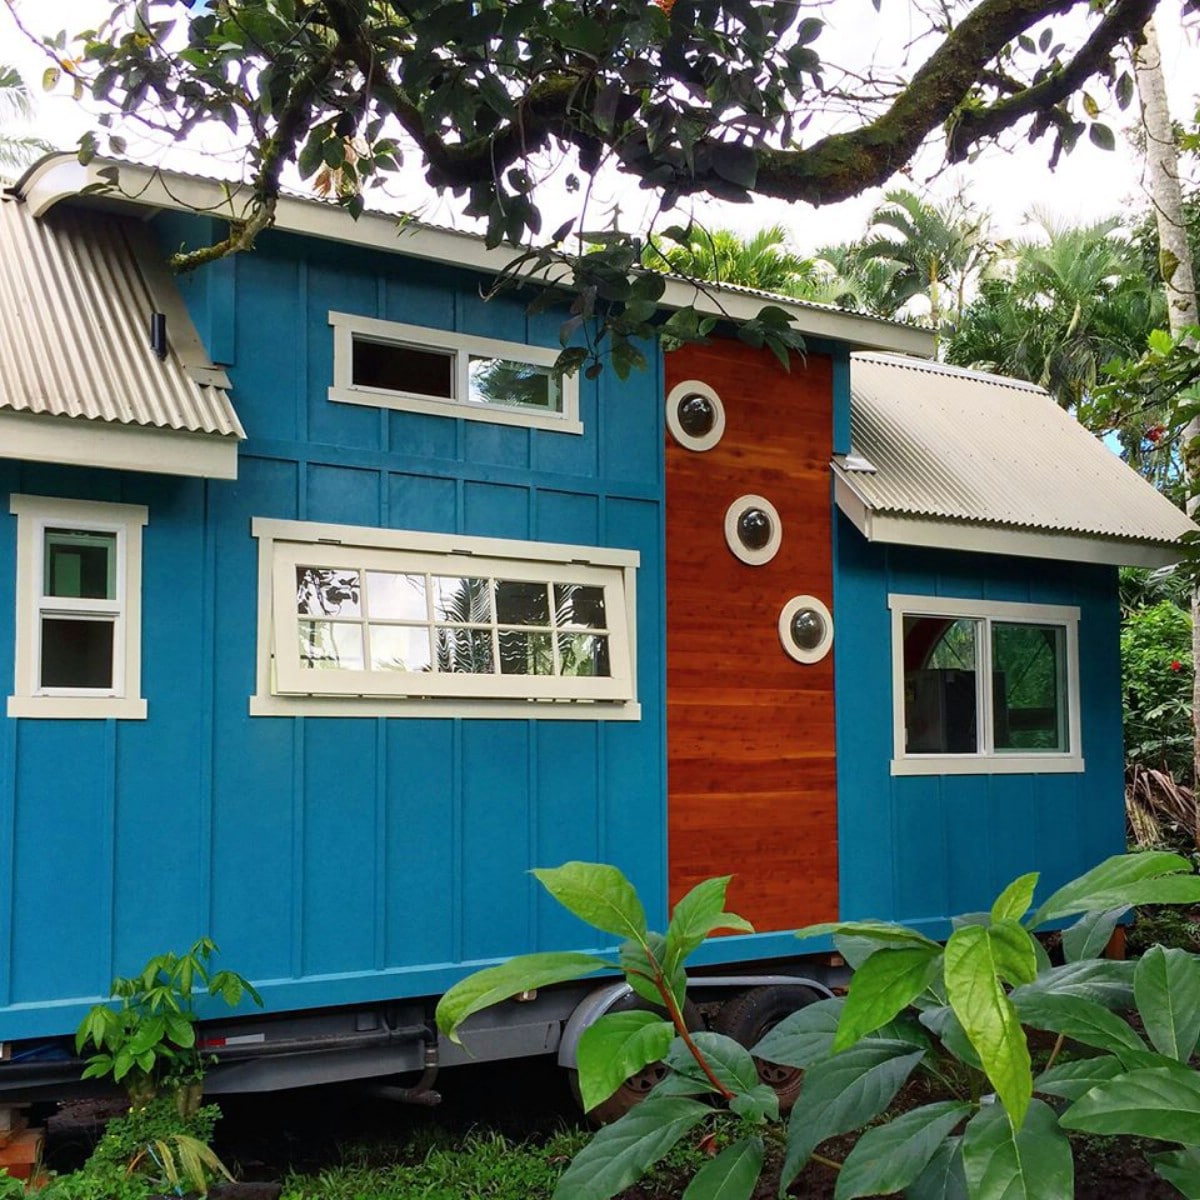 This Cozy Tiny House for Sale is Beautiful in Blue